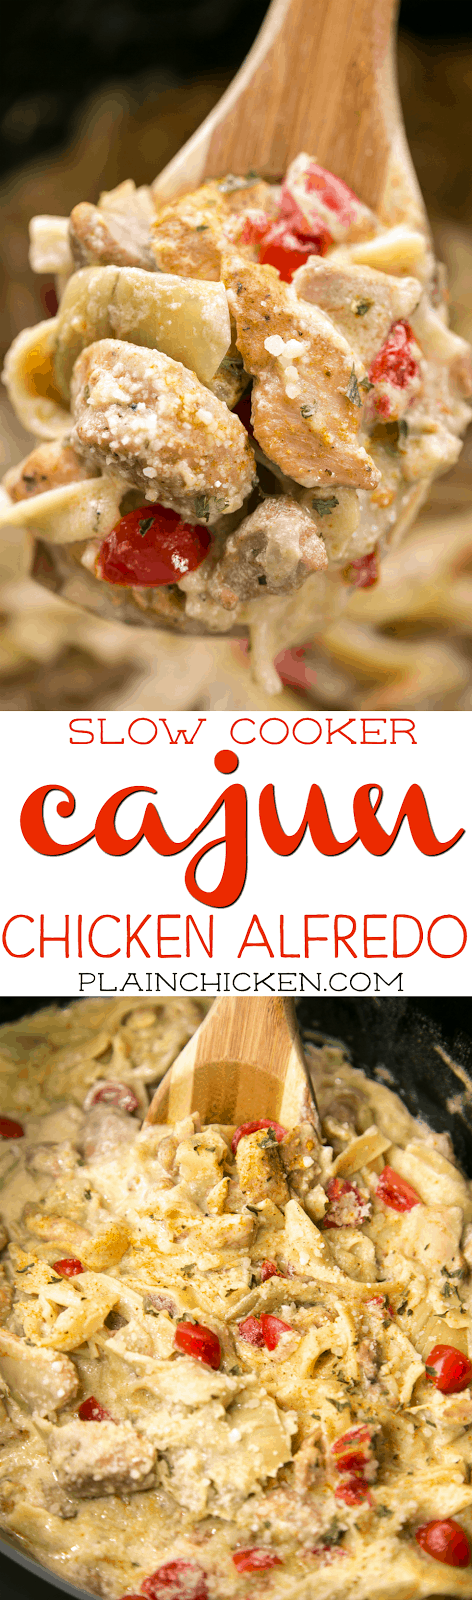 Slow Cooker Cajun Chicken Alfredo - everything cooks in the slow cooker, even the pasta! This is AMAZING!!! Chicken thighs, artichoke hearts, alfredo sauce, chicken broth, egg noodles, parmesan cheese and tomatoes. Everyone cleaned their plates! Definitely going into the rotation!